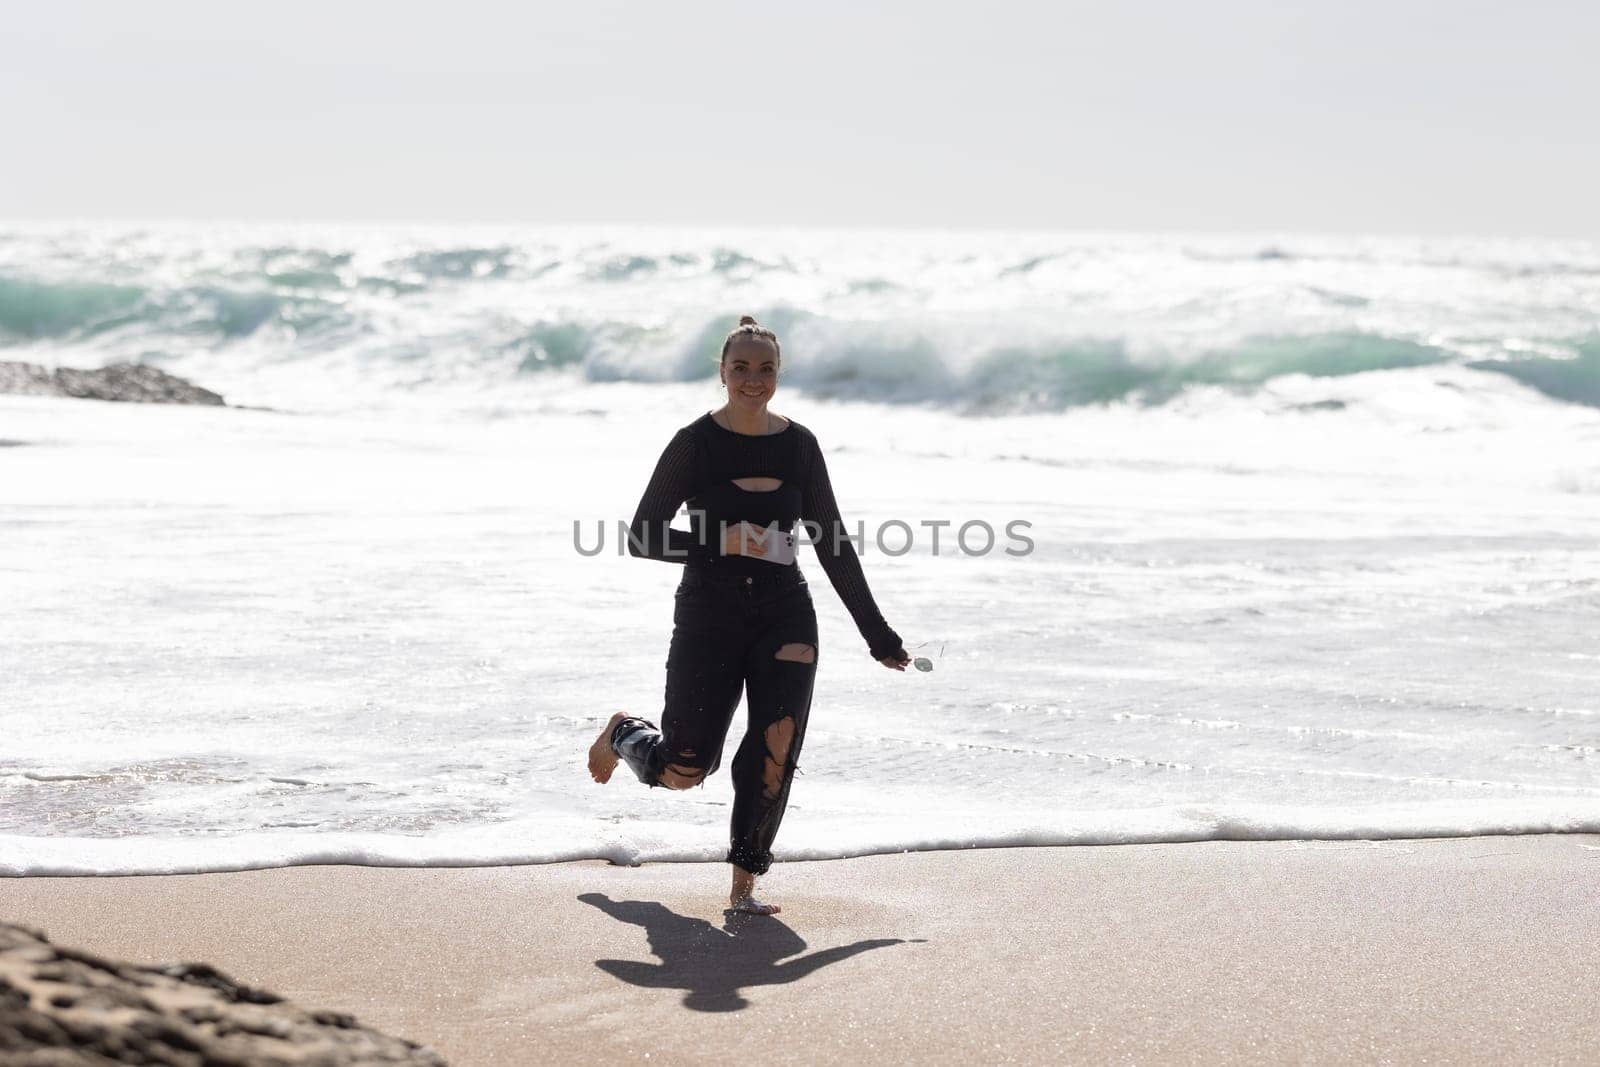 A woman wearing a wet suit is running on the beach. Her hair is flying behind her as she moves energetically along the sandy shore with friends.